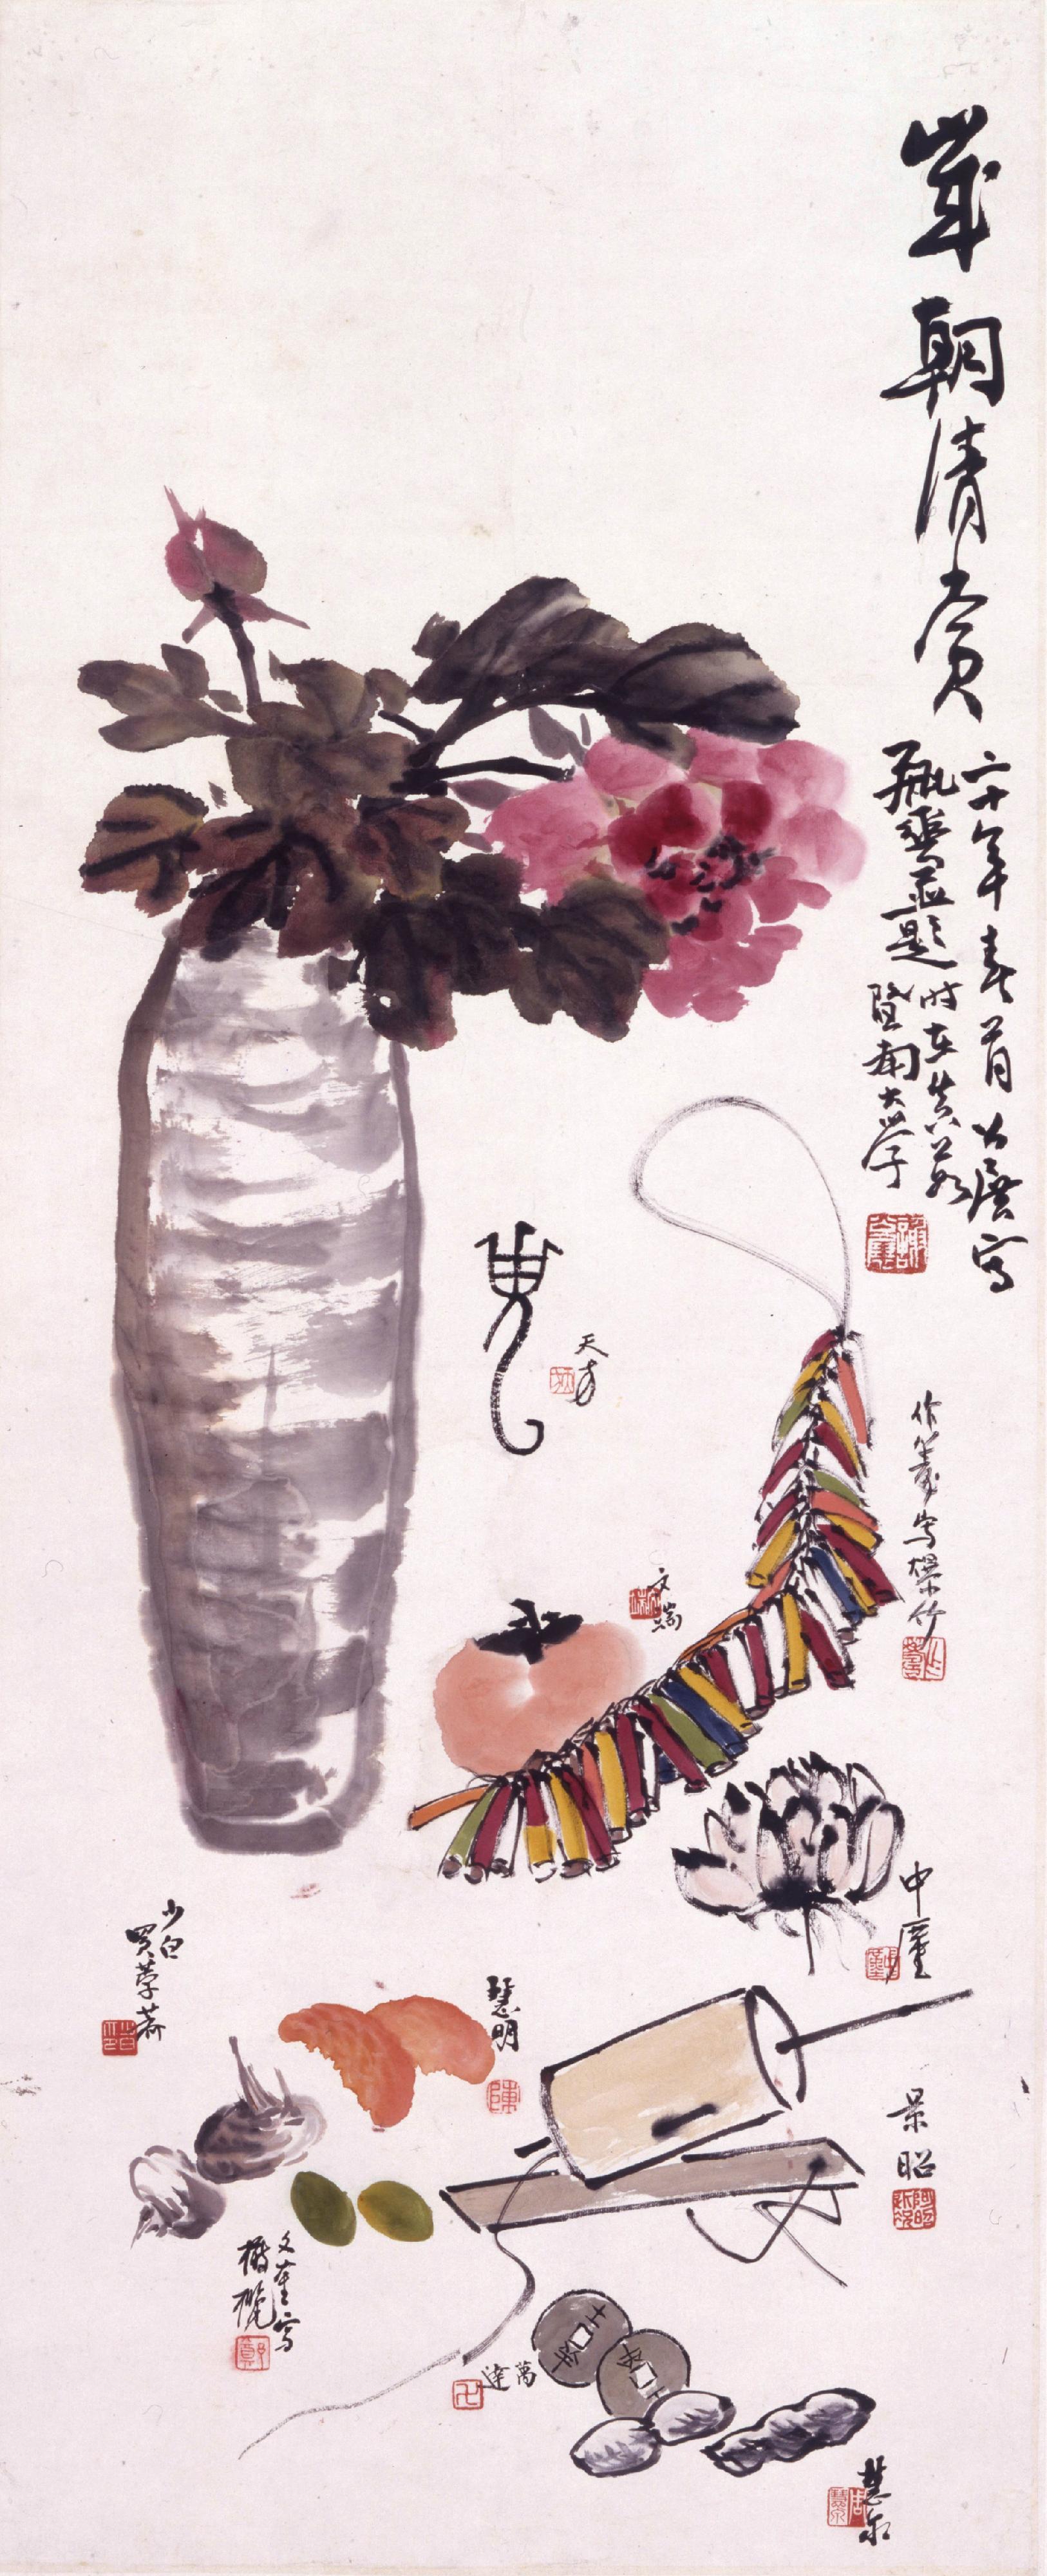 "Love Letters: Everlasting Sentiments from the Xubaizhai Collection" is now on stage at the Hong Kong Museum of Art (HKMoA). With love letters as the theme, the HKMoA invites audiences to discover the reserved and implicit emotions encapsulated in Chinese paintings and calligraphy. Picture shows the painting "New Year offerings" created together by Xie Gongzhan (1885 - 1940) and his students including Low Chuck-tiew (1911 - 1993).
